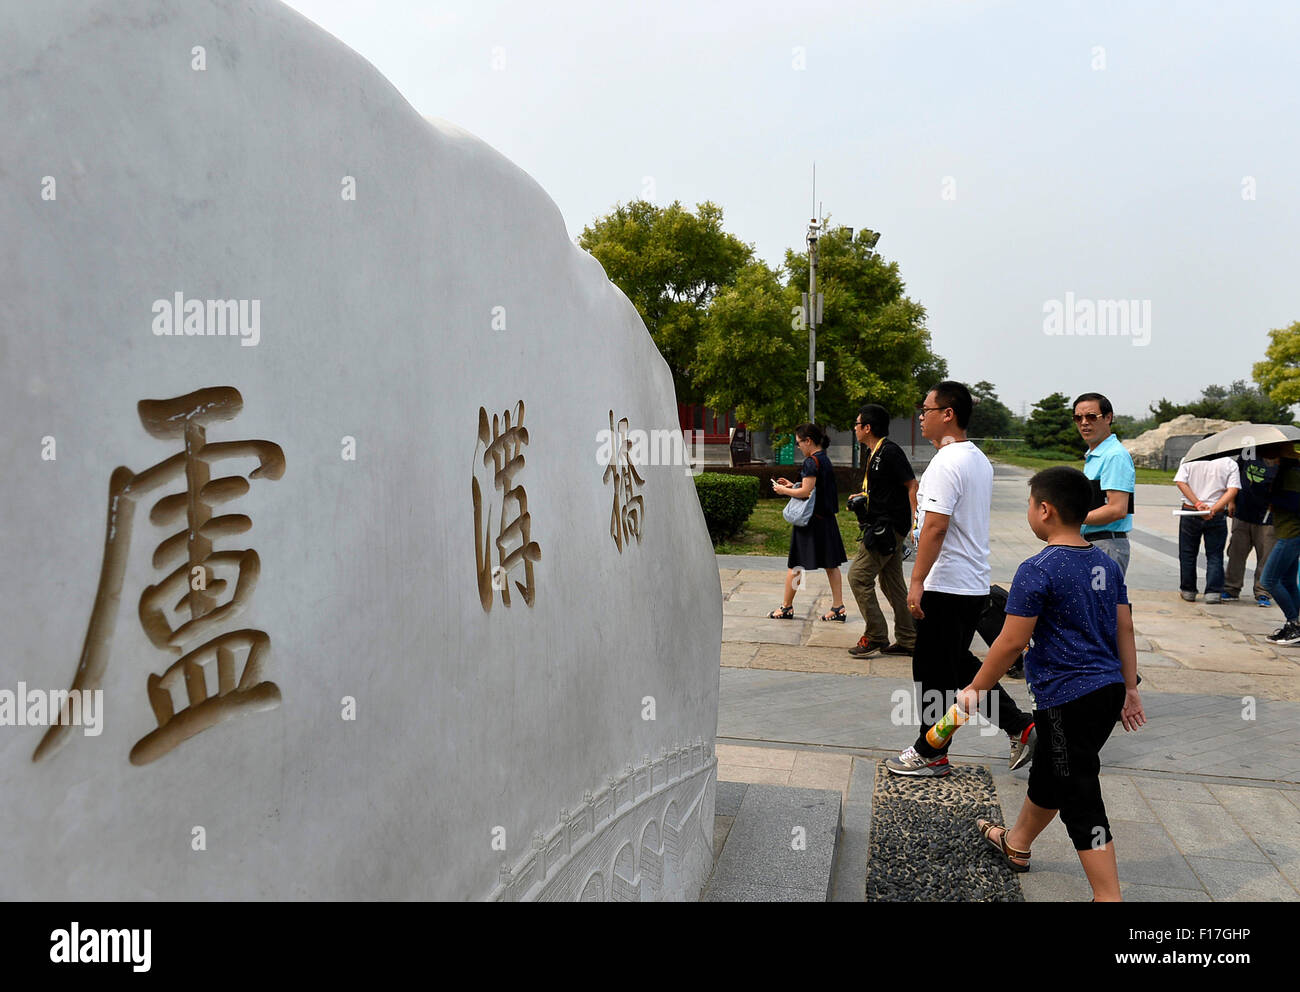 Beijing, Capital of China. 29th Aug, 2015. People visit Lugou Bridge where Japan launched the all-out war of aggression against China, in Beijing, Capital of China, Aug. 29, 2015. China will stage a military parade on Sept. 3 to commemorate the 70th anniversary of the victory of the Chinese People's War of Resistance Against Japanese Aggression and the World Anti-Fascist War. © Peng Zhaozhi/Xinhua/Alamy Live News Stock Photo